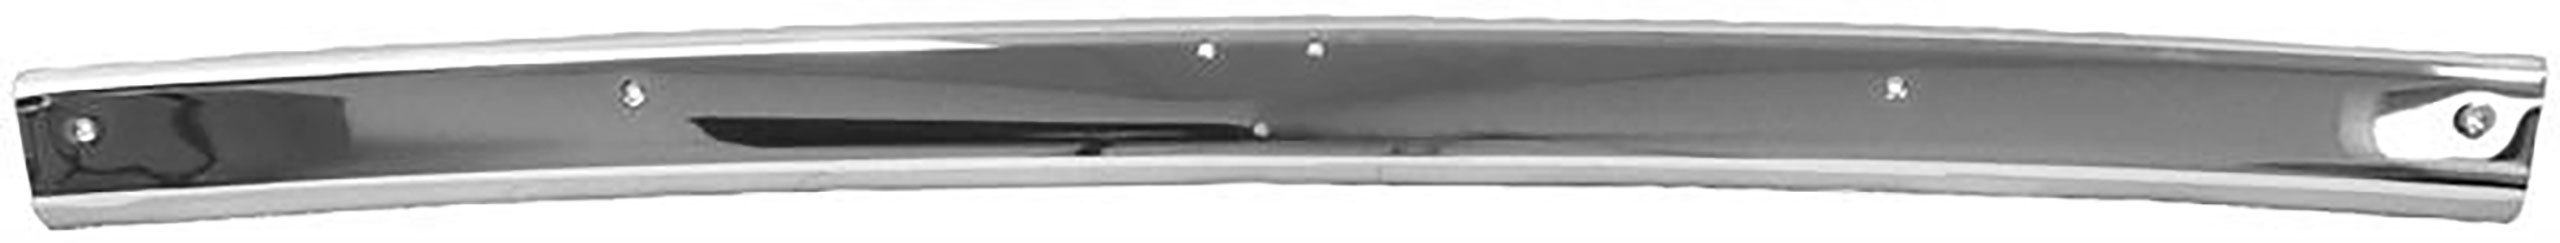 First Generation 1965-1967 Ford Mustang Convertible Header Molding - Dynacorn